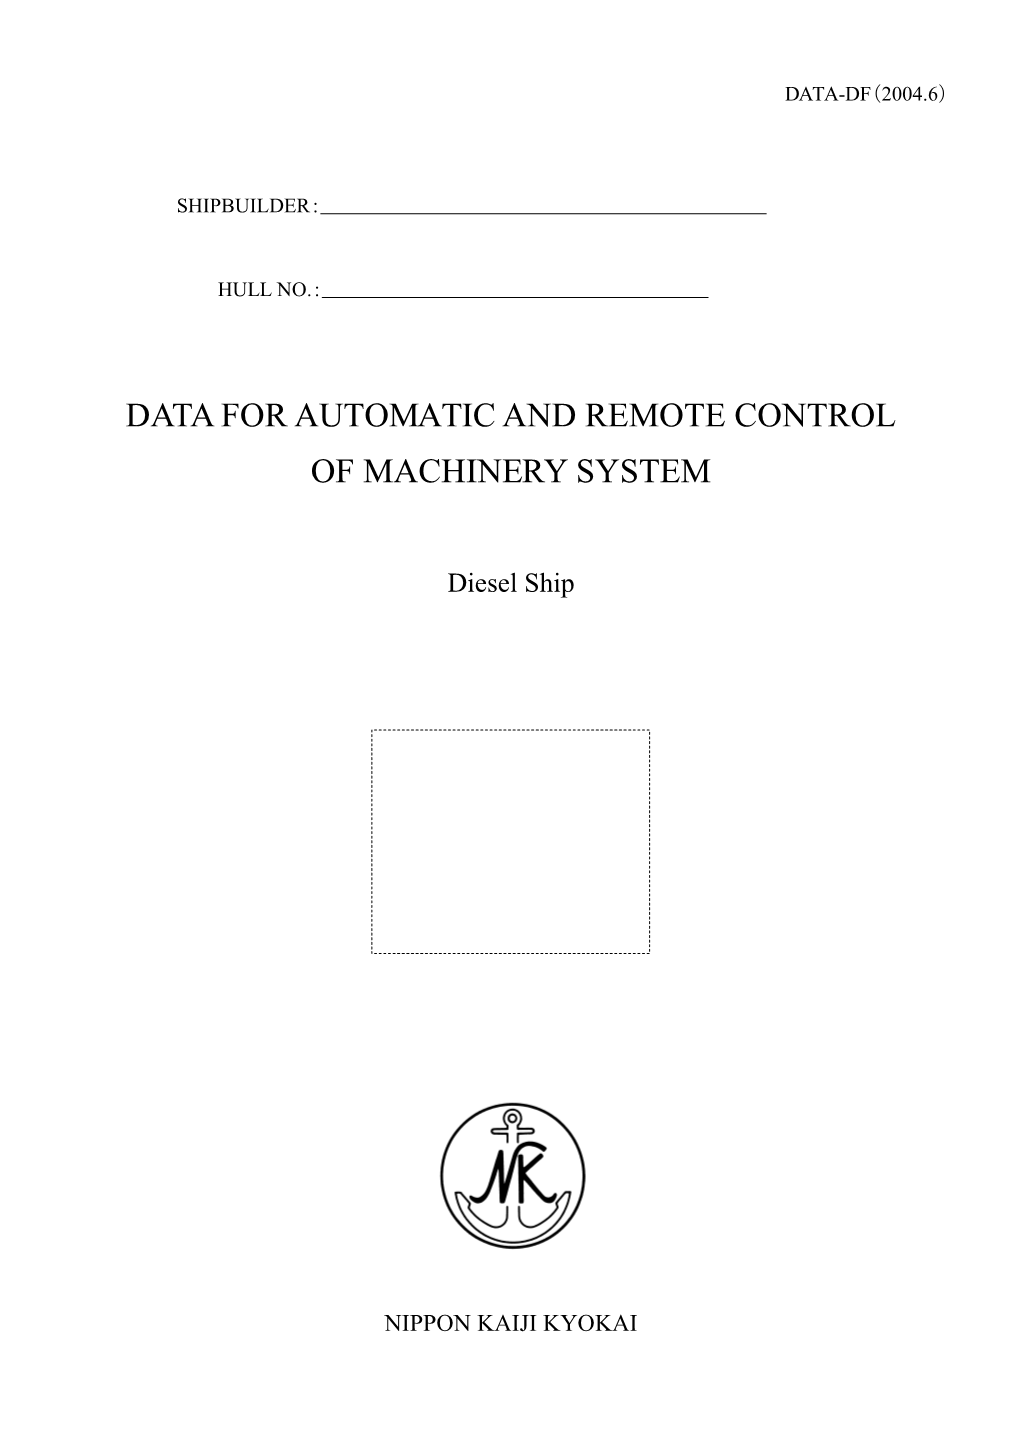 Data for Automatic and Remote Control